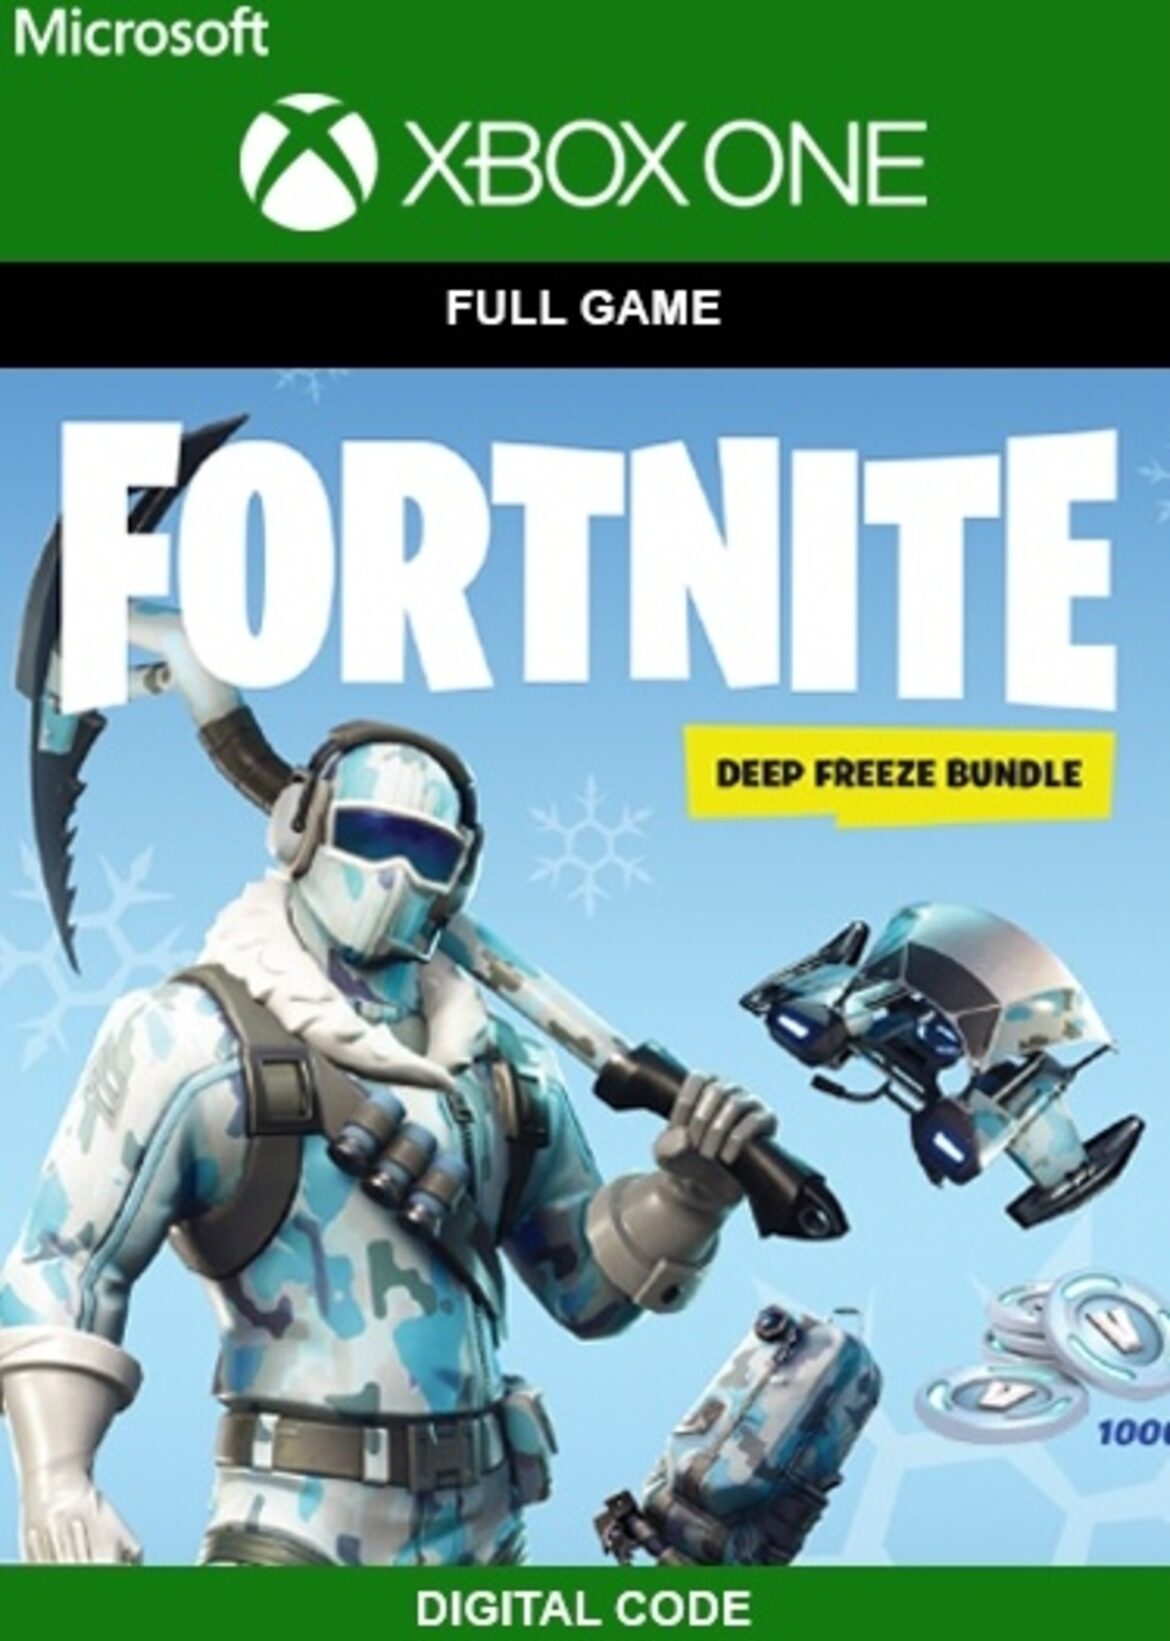 Four Fb Pages To Follow About How to Put v Bucks Gift Card on Xbox One